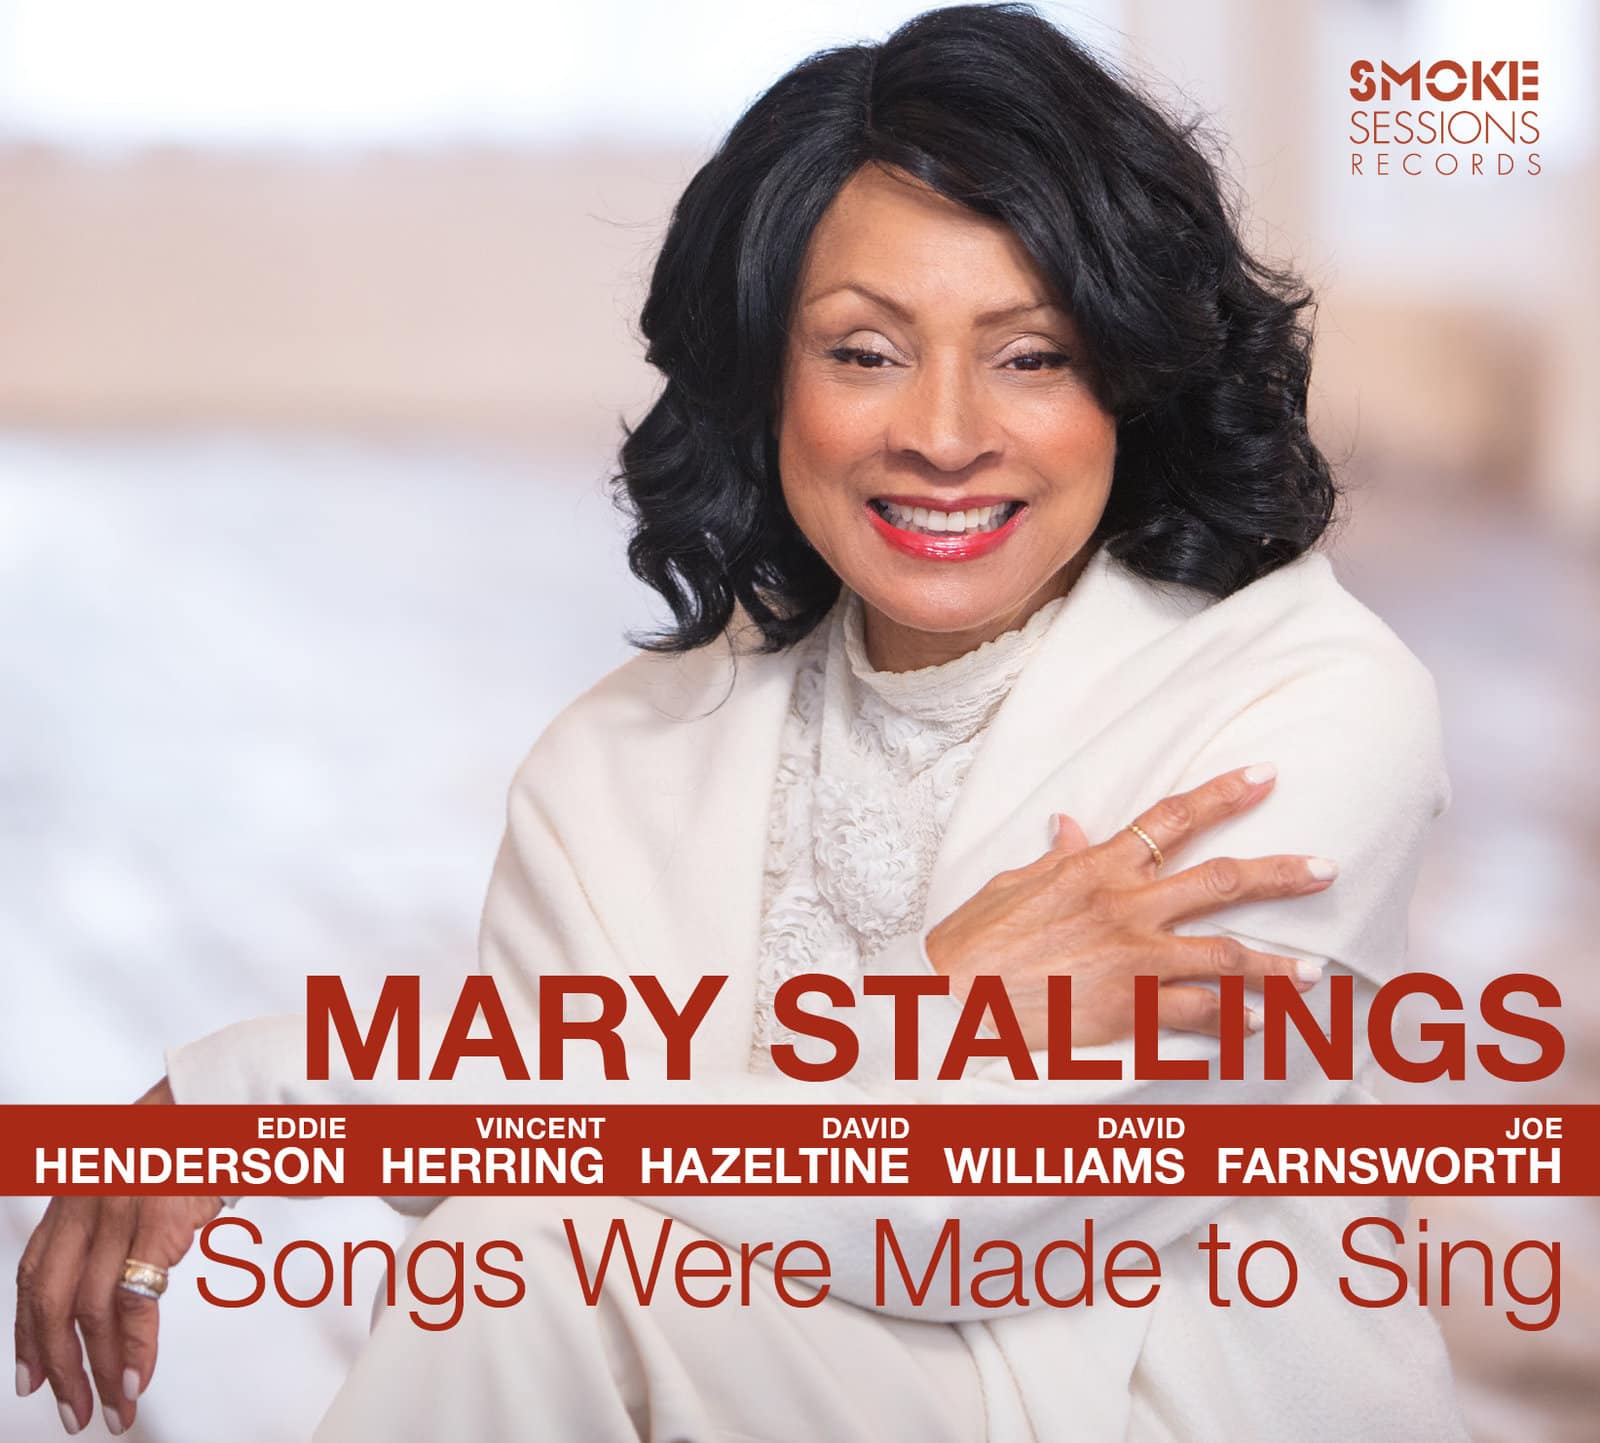 Image result for mary stallings songs were made to sing